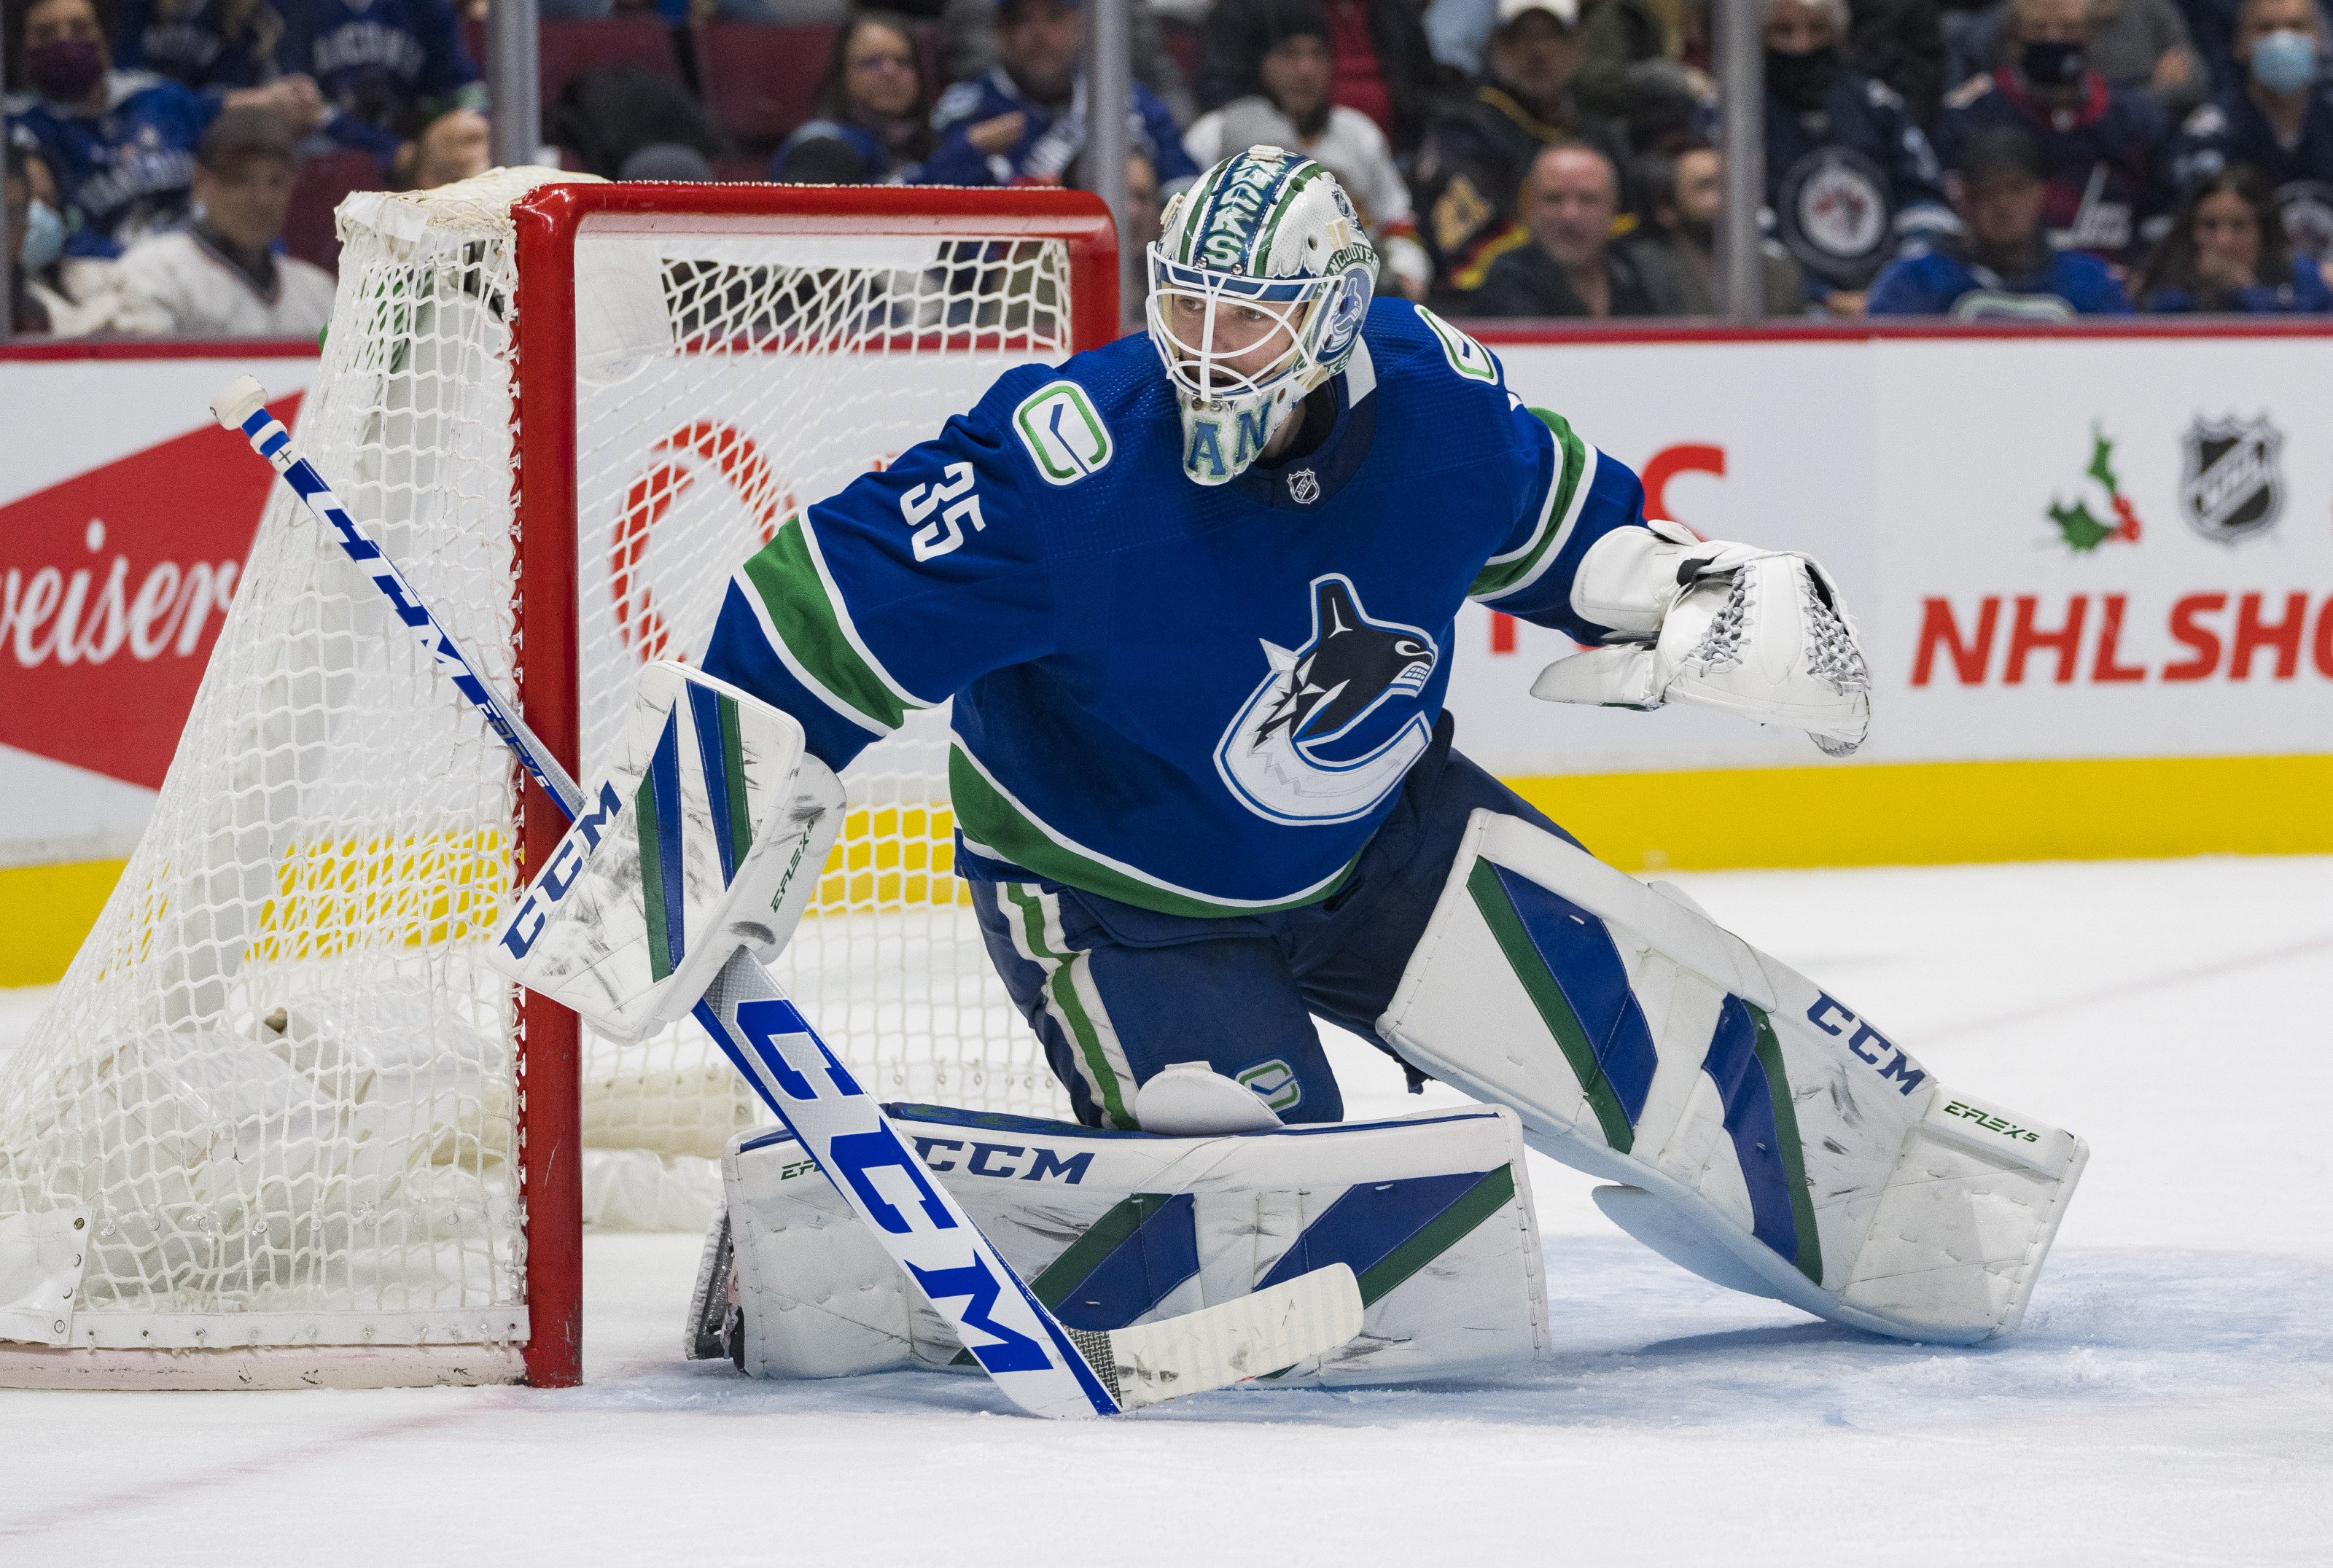 Gino Hard - This picture of Thatcher Demko in the Canucks